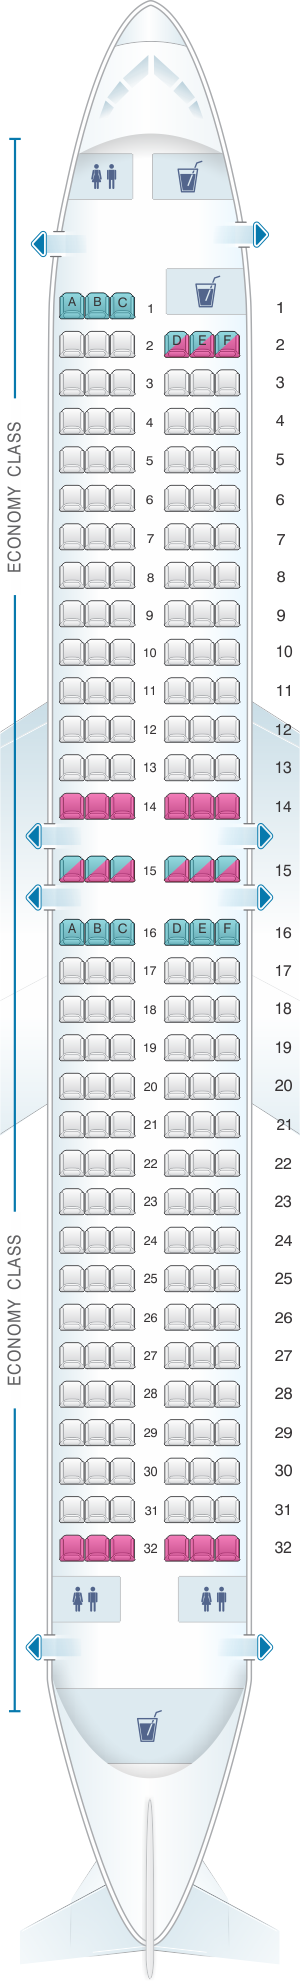 46+ Seating plan on the tui dreamliner